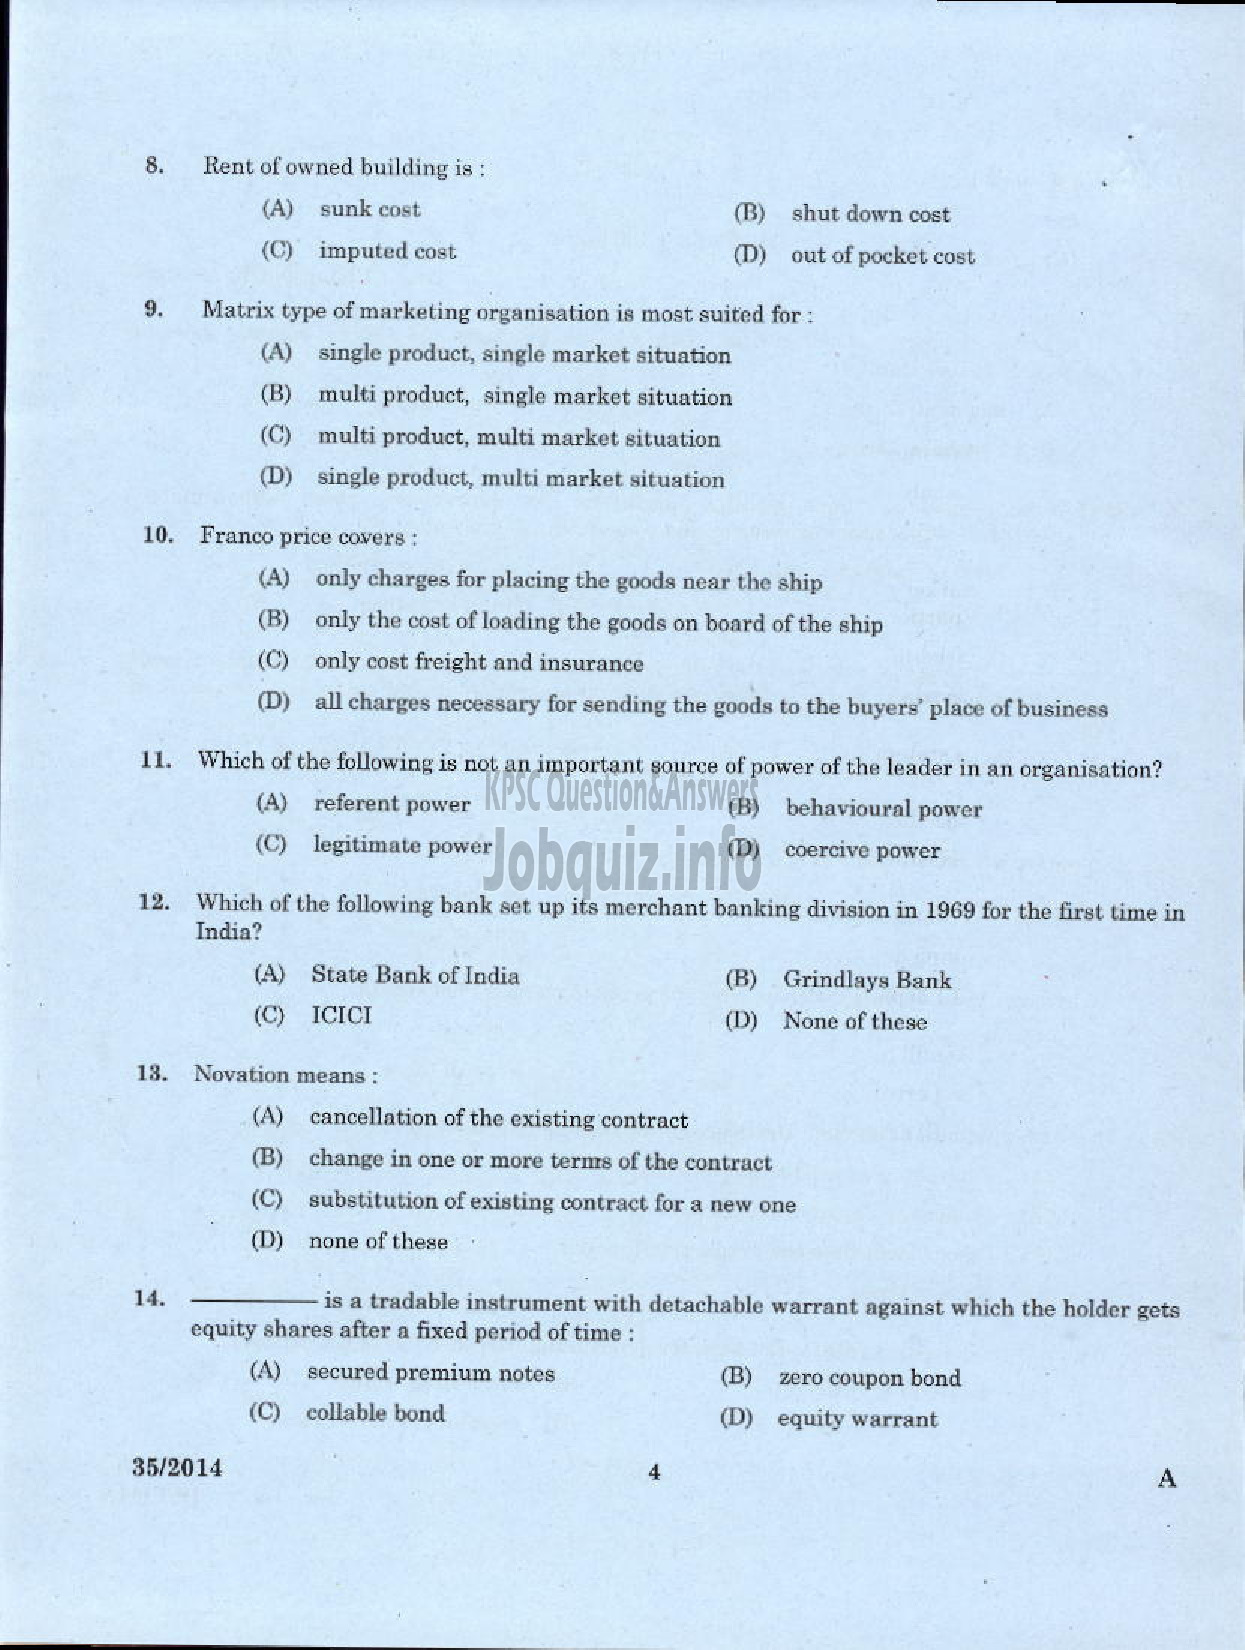 Kerala PSC Question Paper - JUNIOR ASSISTANT ACCOUNTS SR FOR ST ONLY TRAVANCORE COCHIN CHEMICALS LIMITED-2